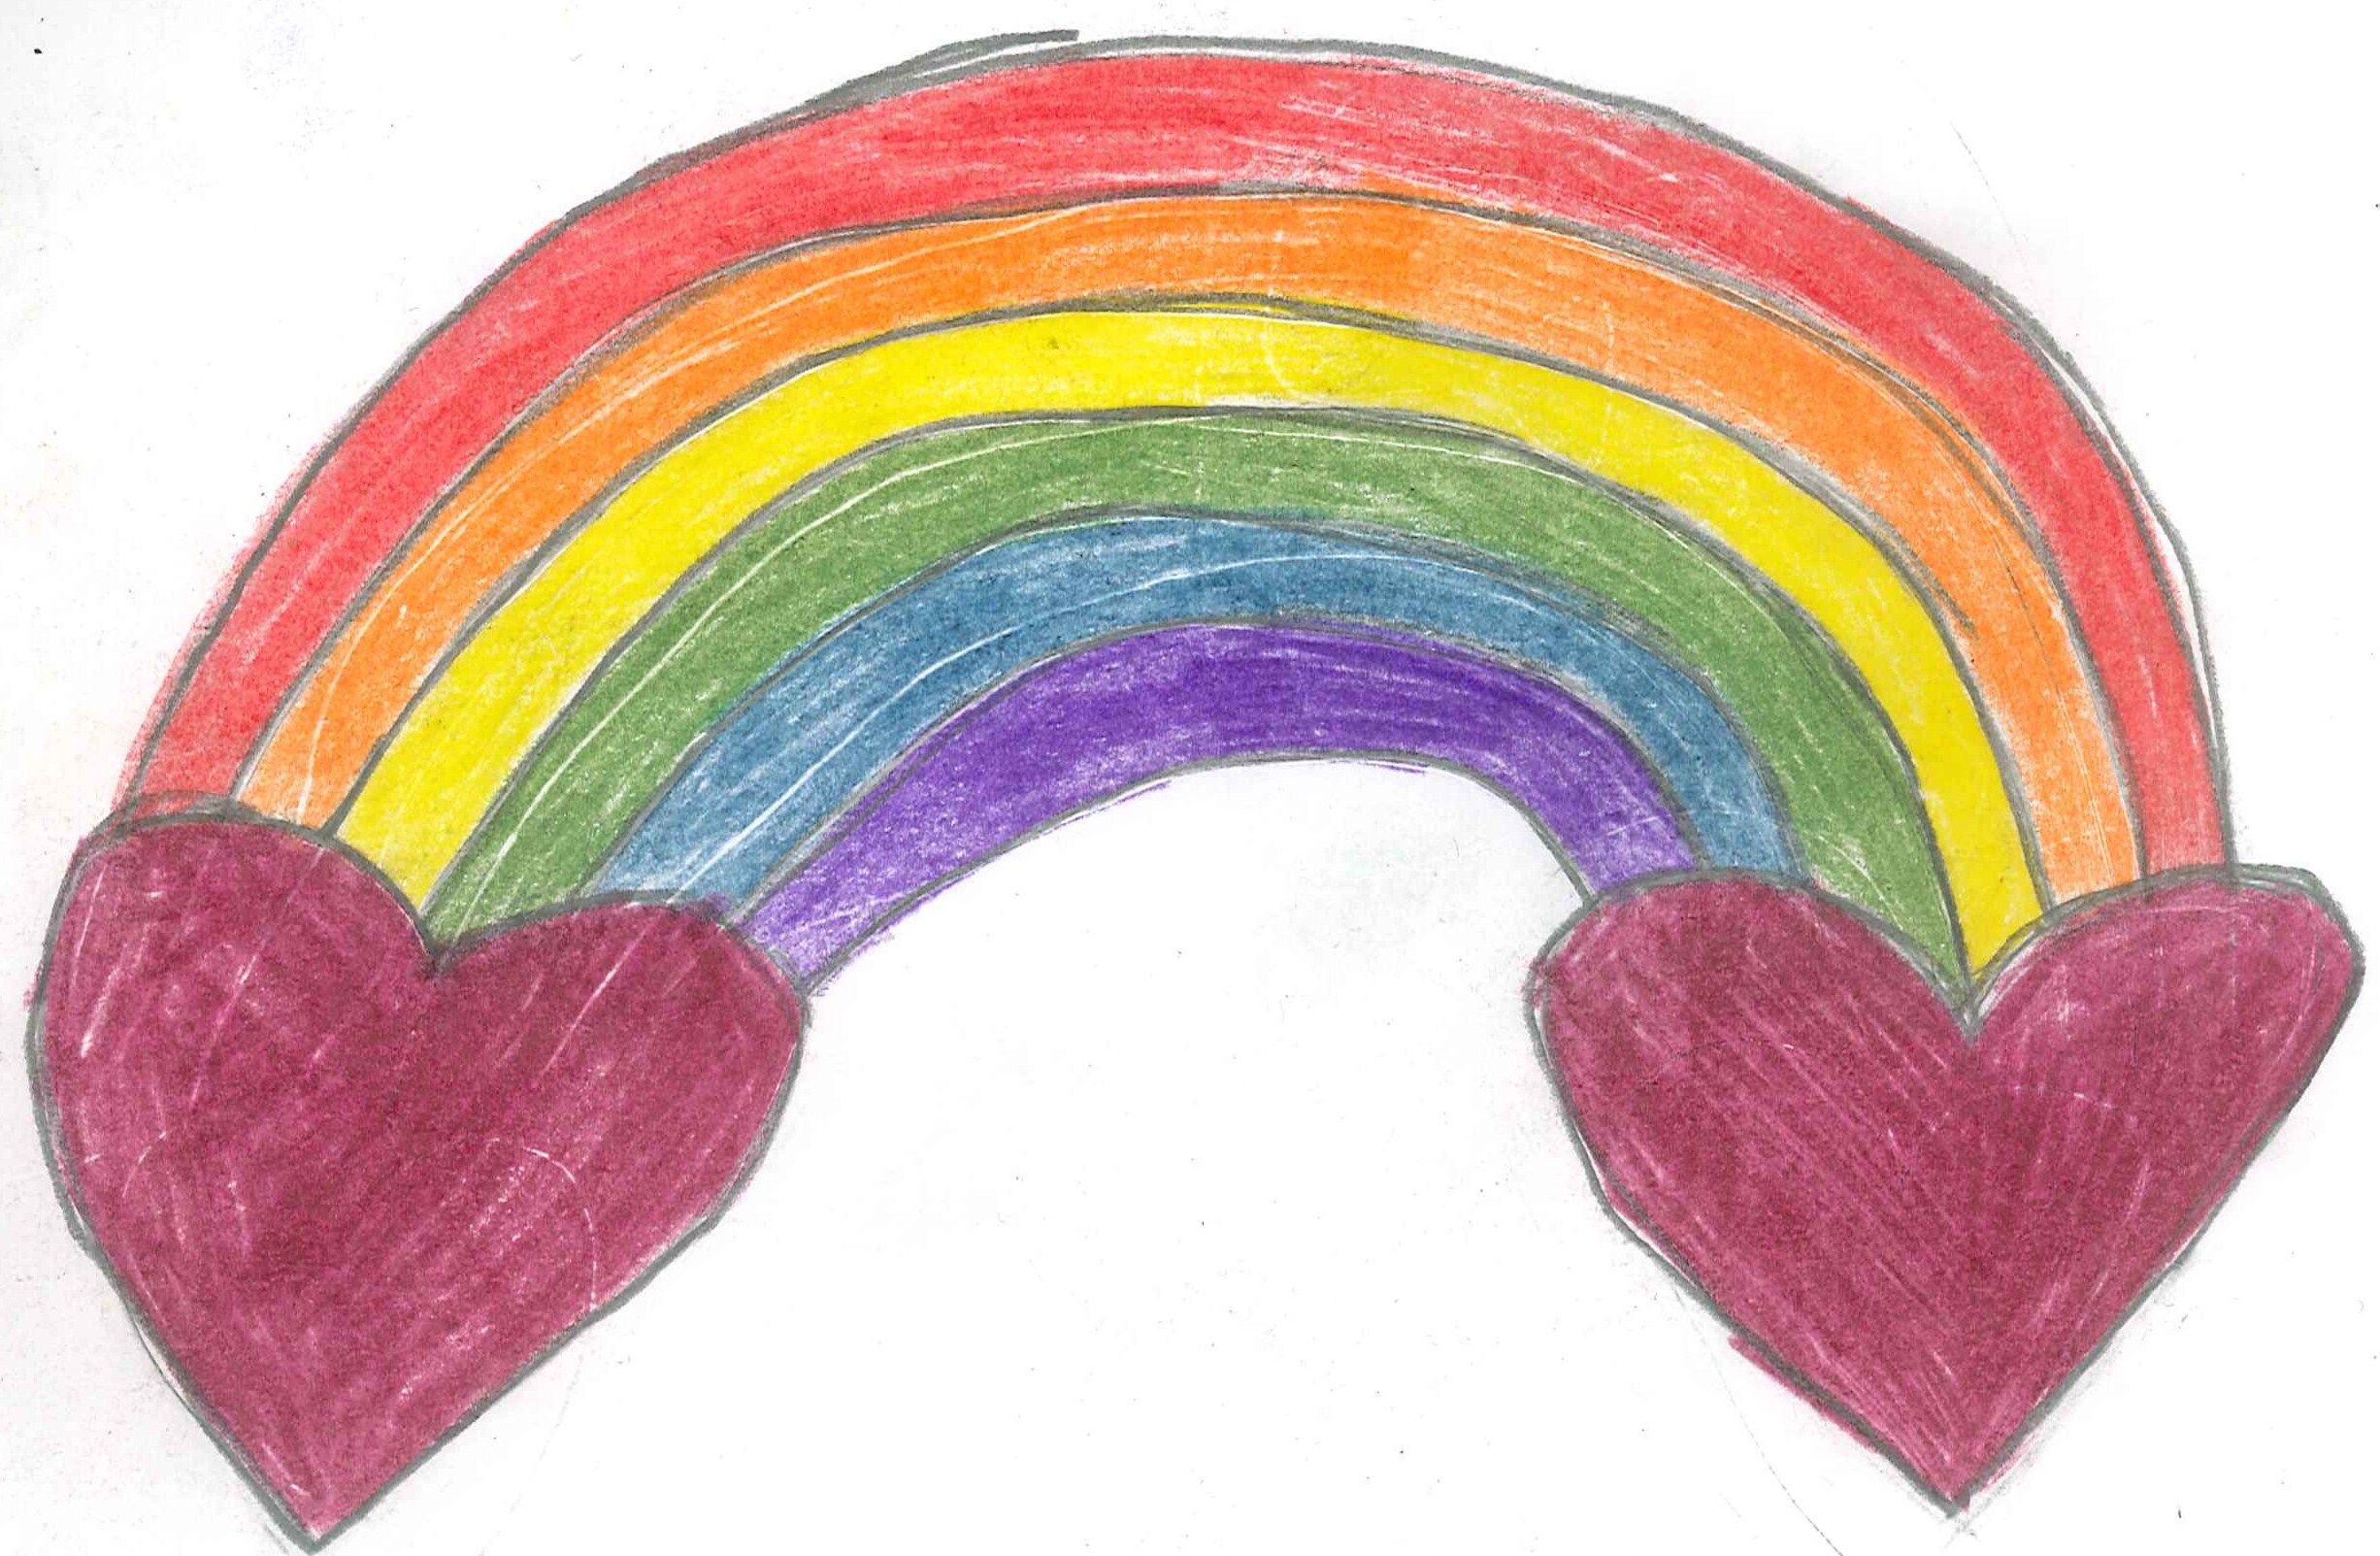 Rainbow Drawing - ClipArt Best